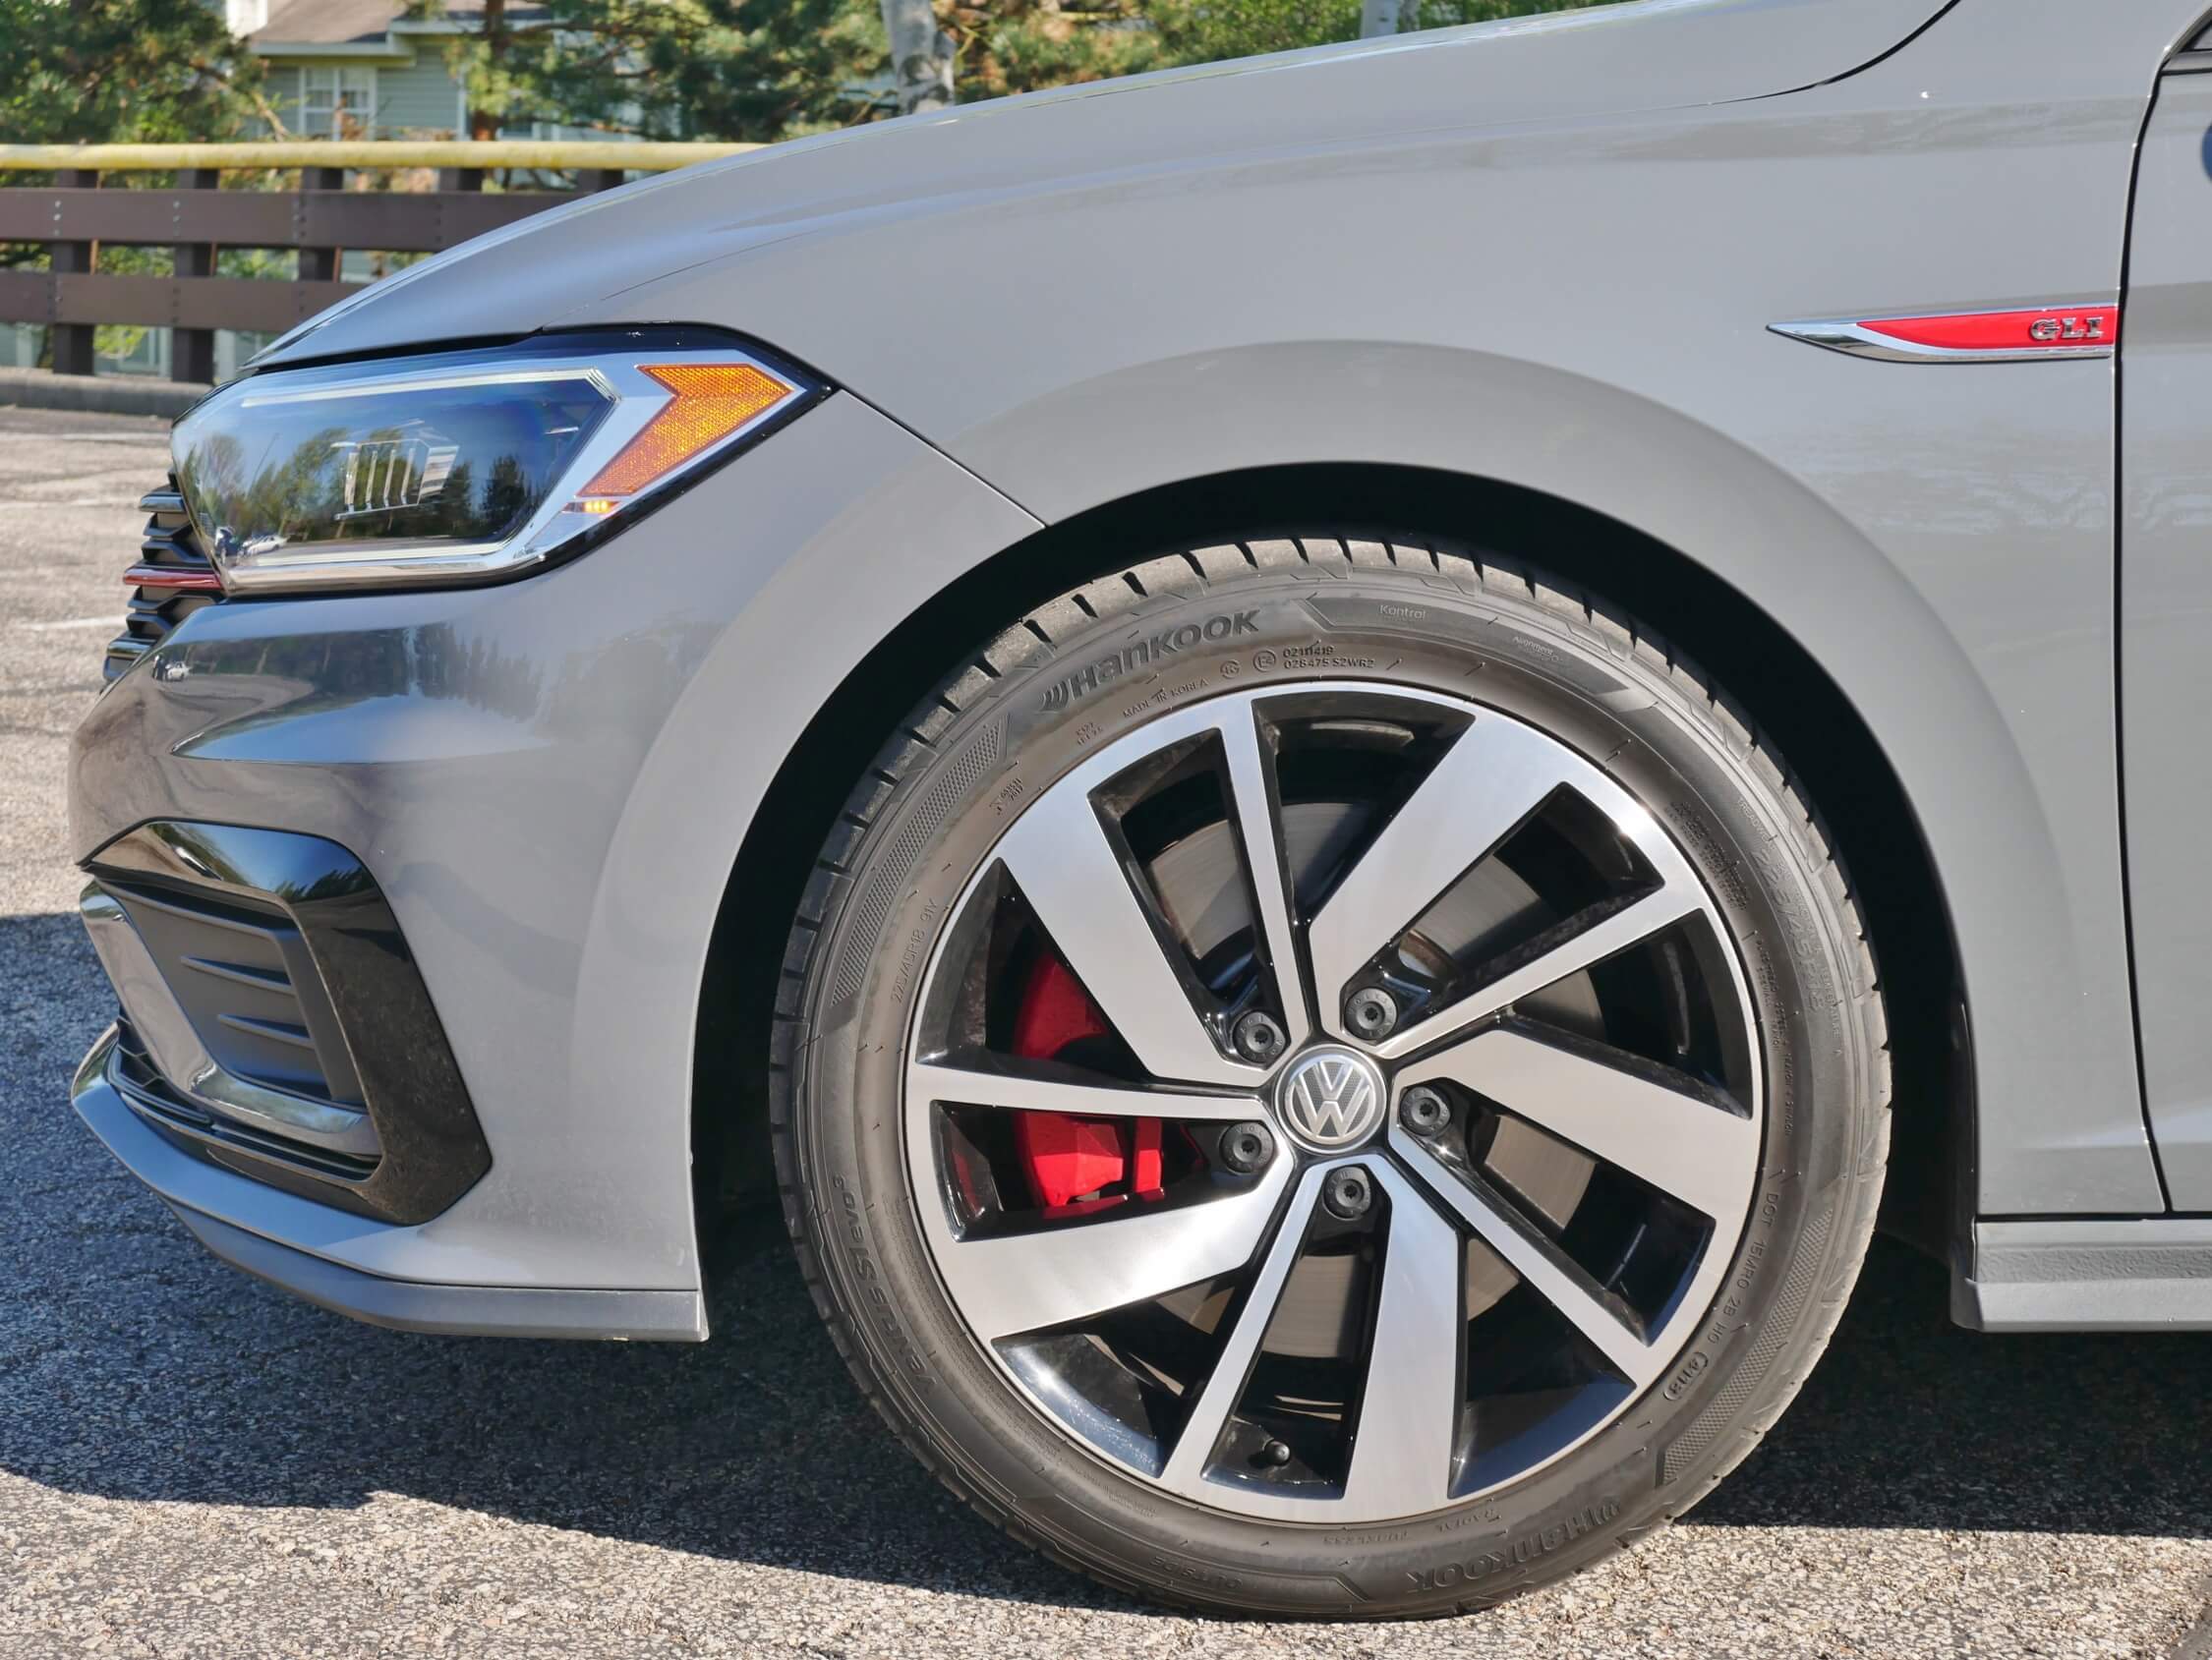 2019 Volkswagen Jetta GLI Autobahn: MQB platform delivers quicker rebound, and especially impressive grip when fitted with Opt. 3 season UHP tires. Oversized 13" front brake rotors adopted from Golf RS dissipate heat.